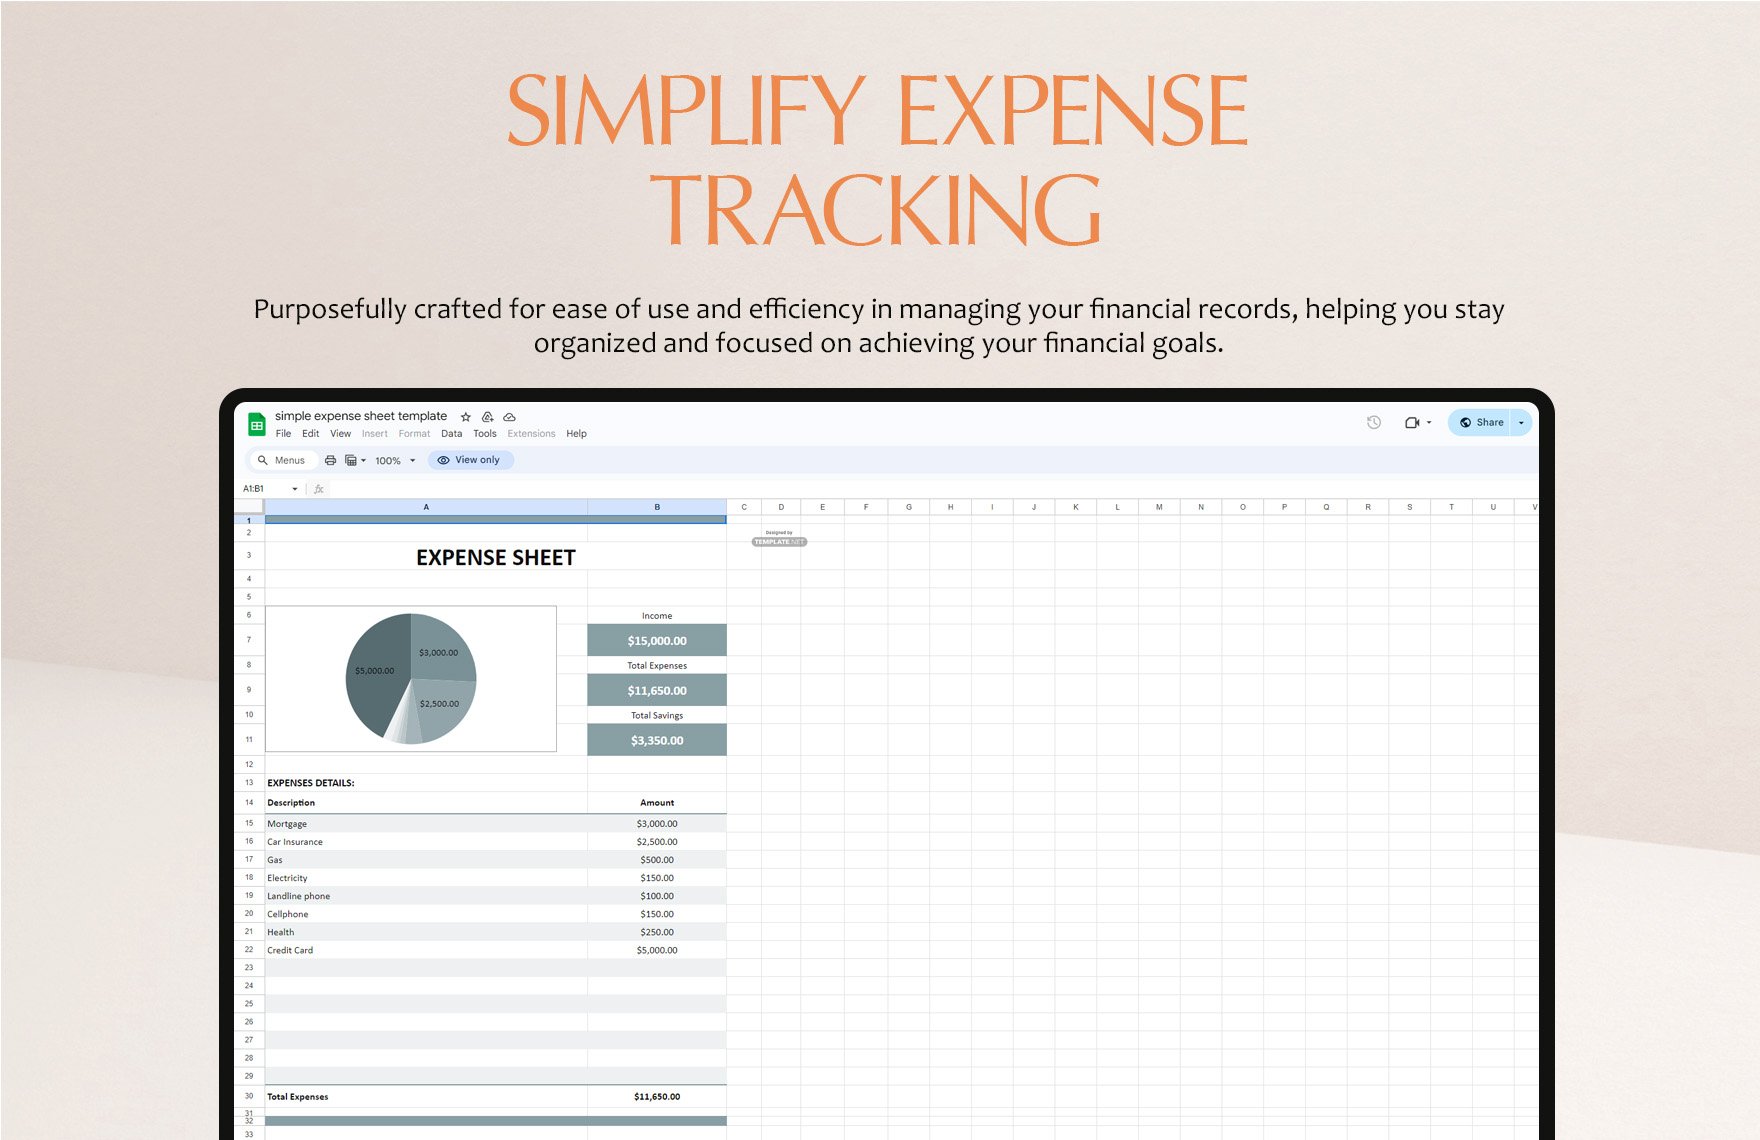 Simple Expense Sheet Template